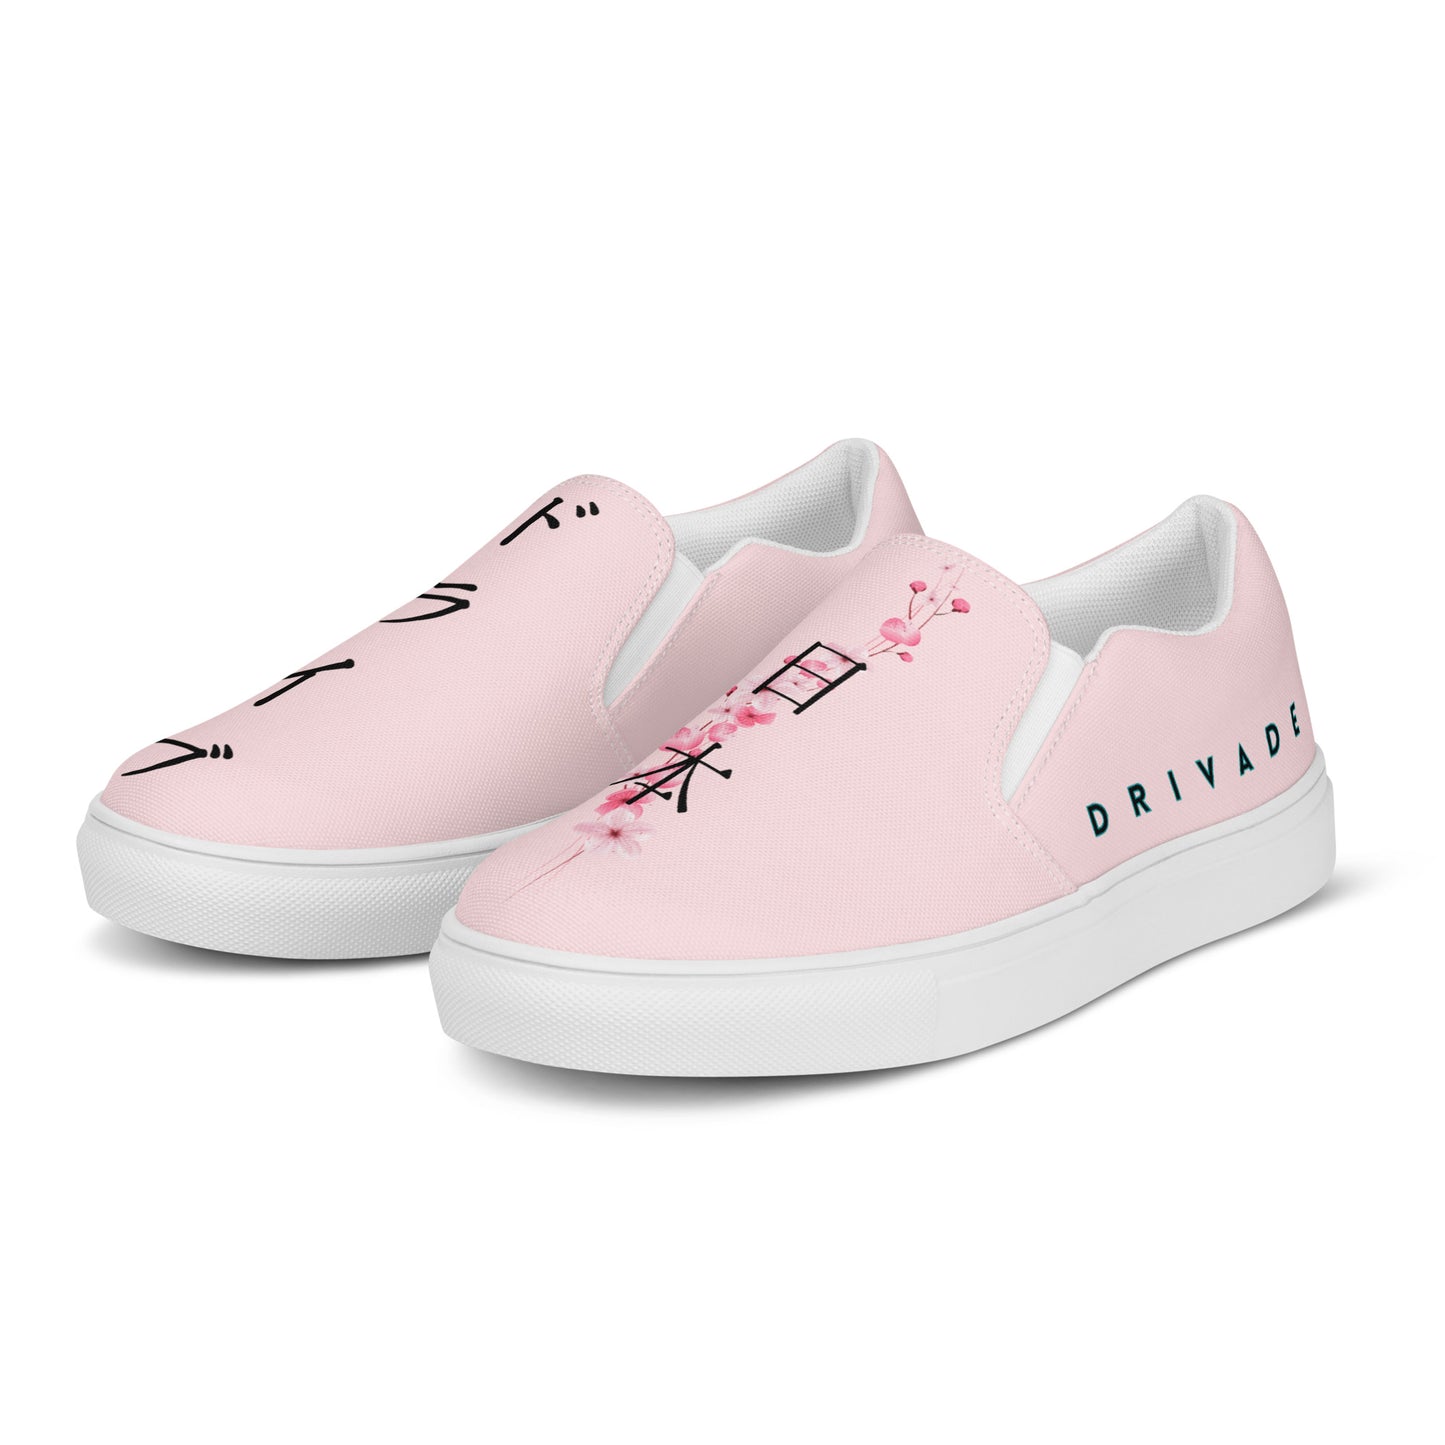 Cherry Blossom Women Loafers - Pink